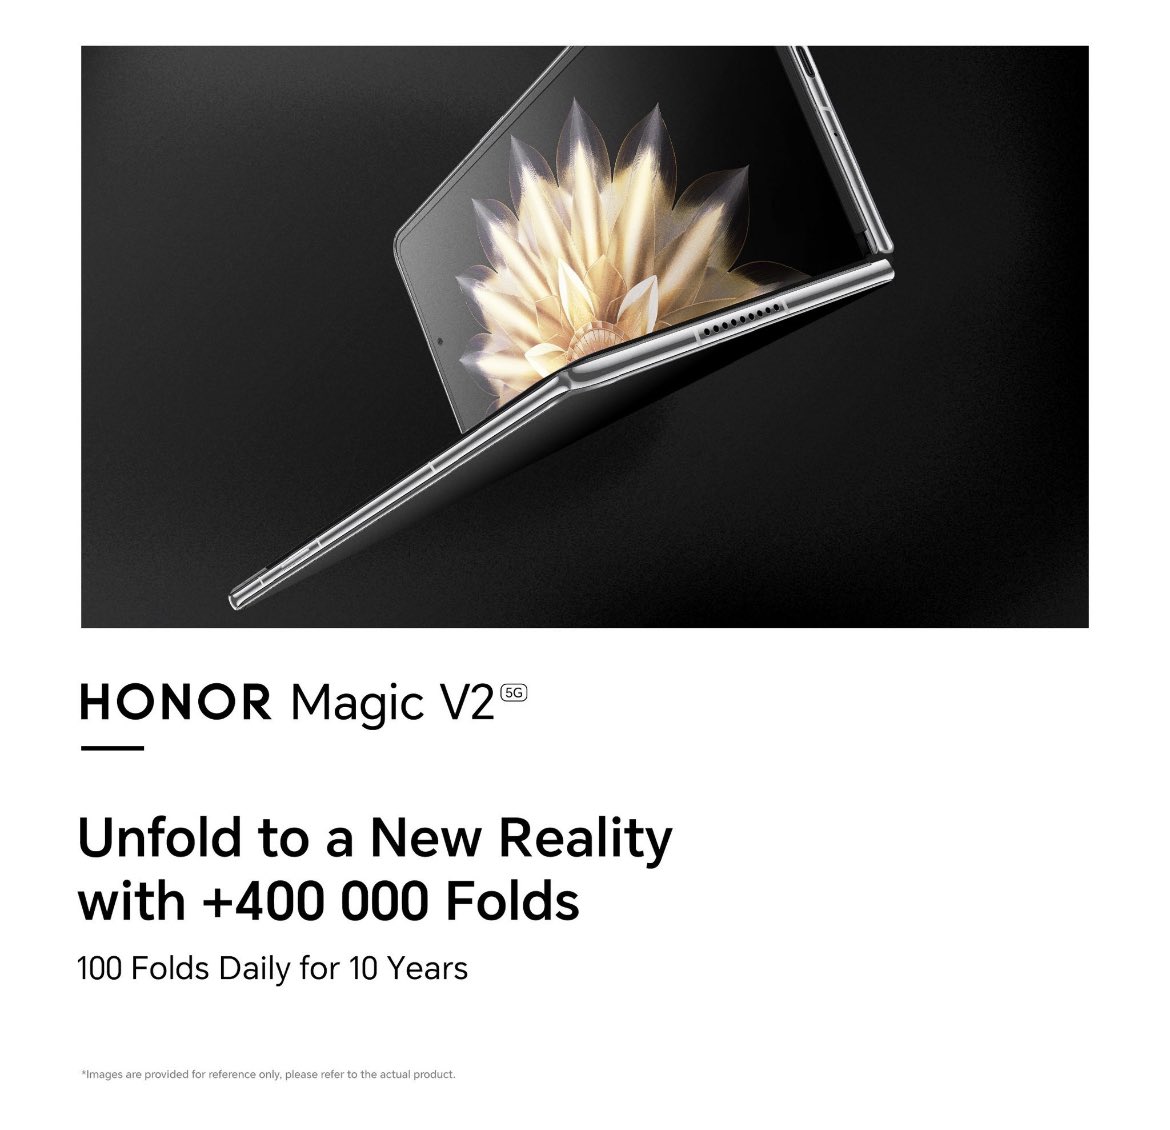 And we’re up! Now available in store ! 😤🔥

#DiscoverTheMagic
#HONORMagicV2